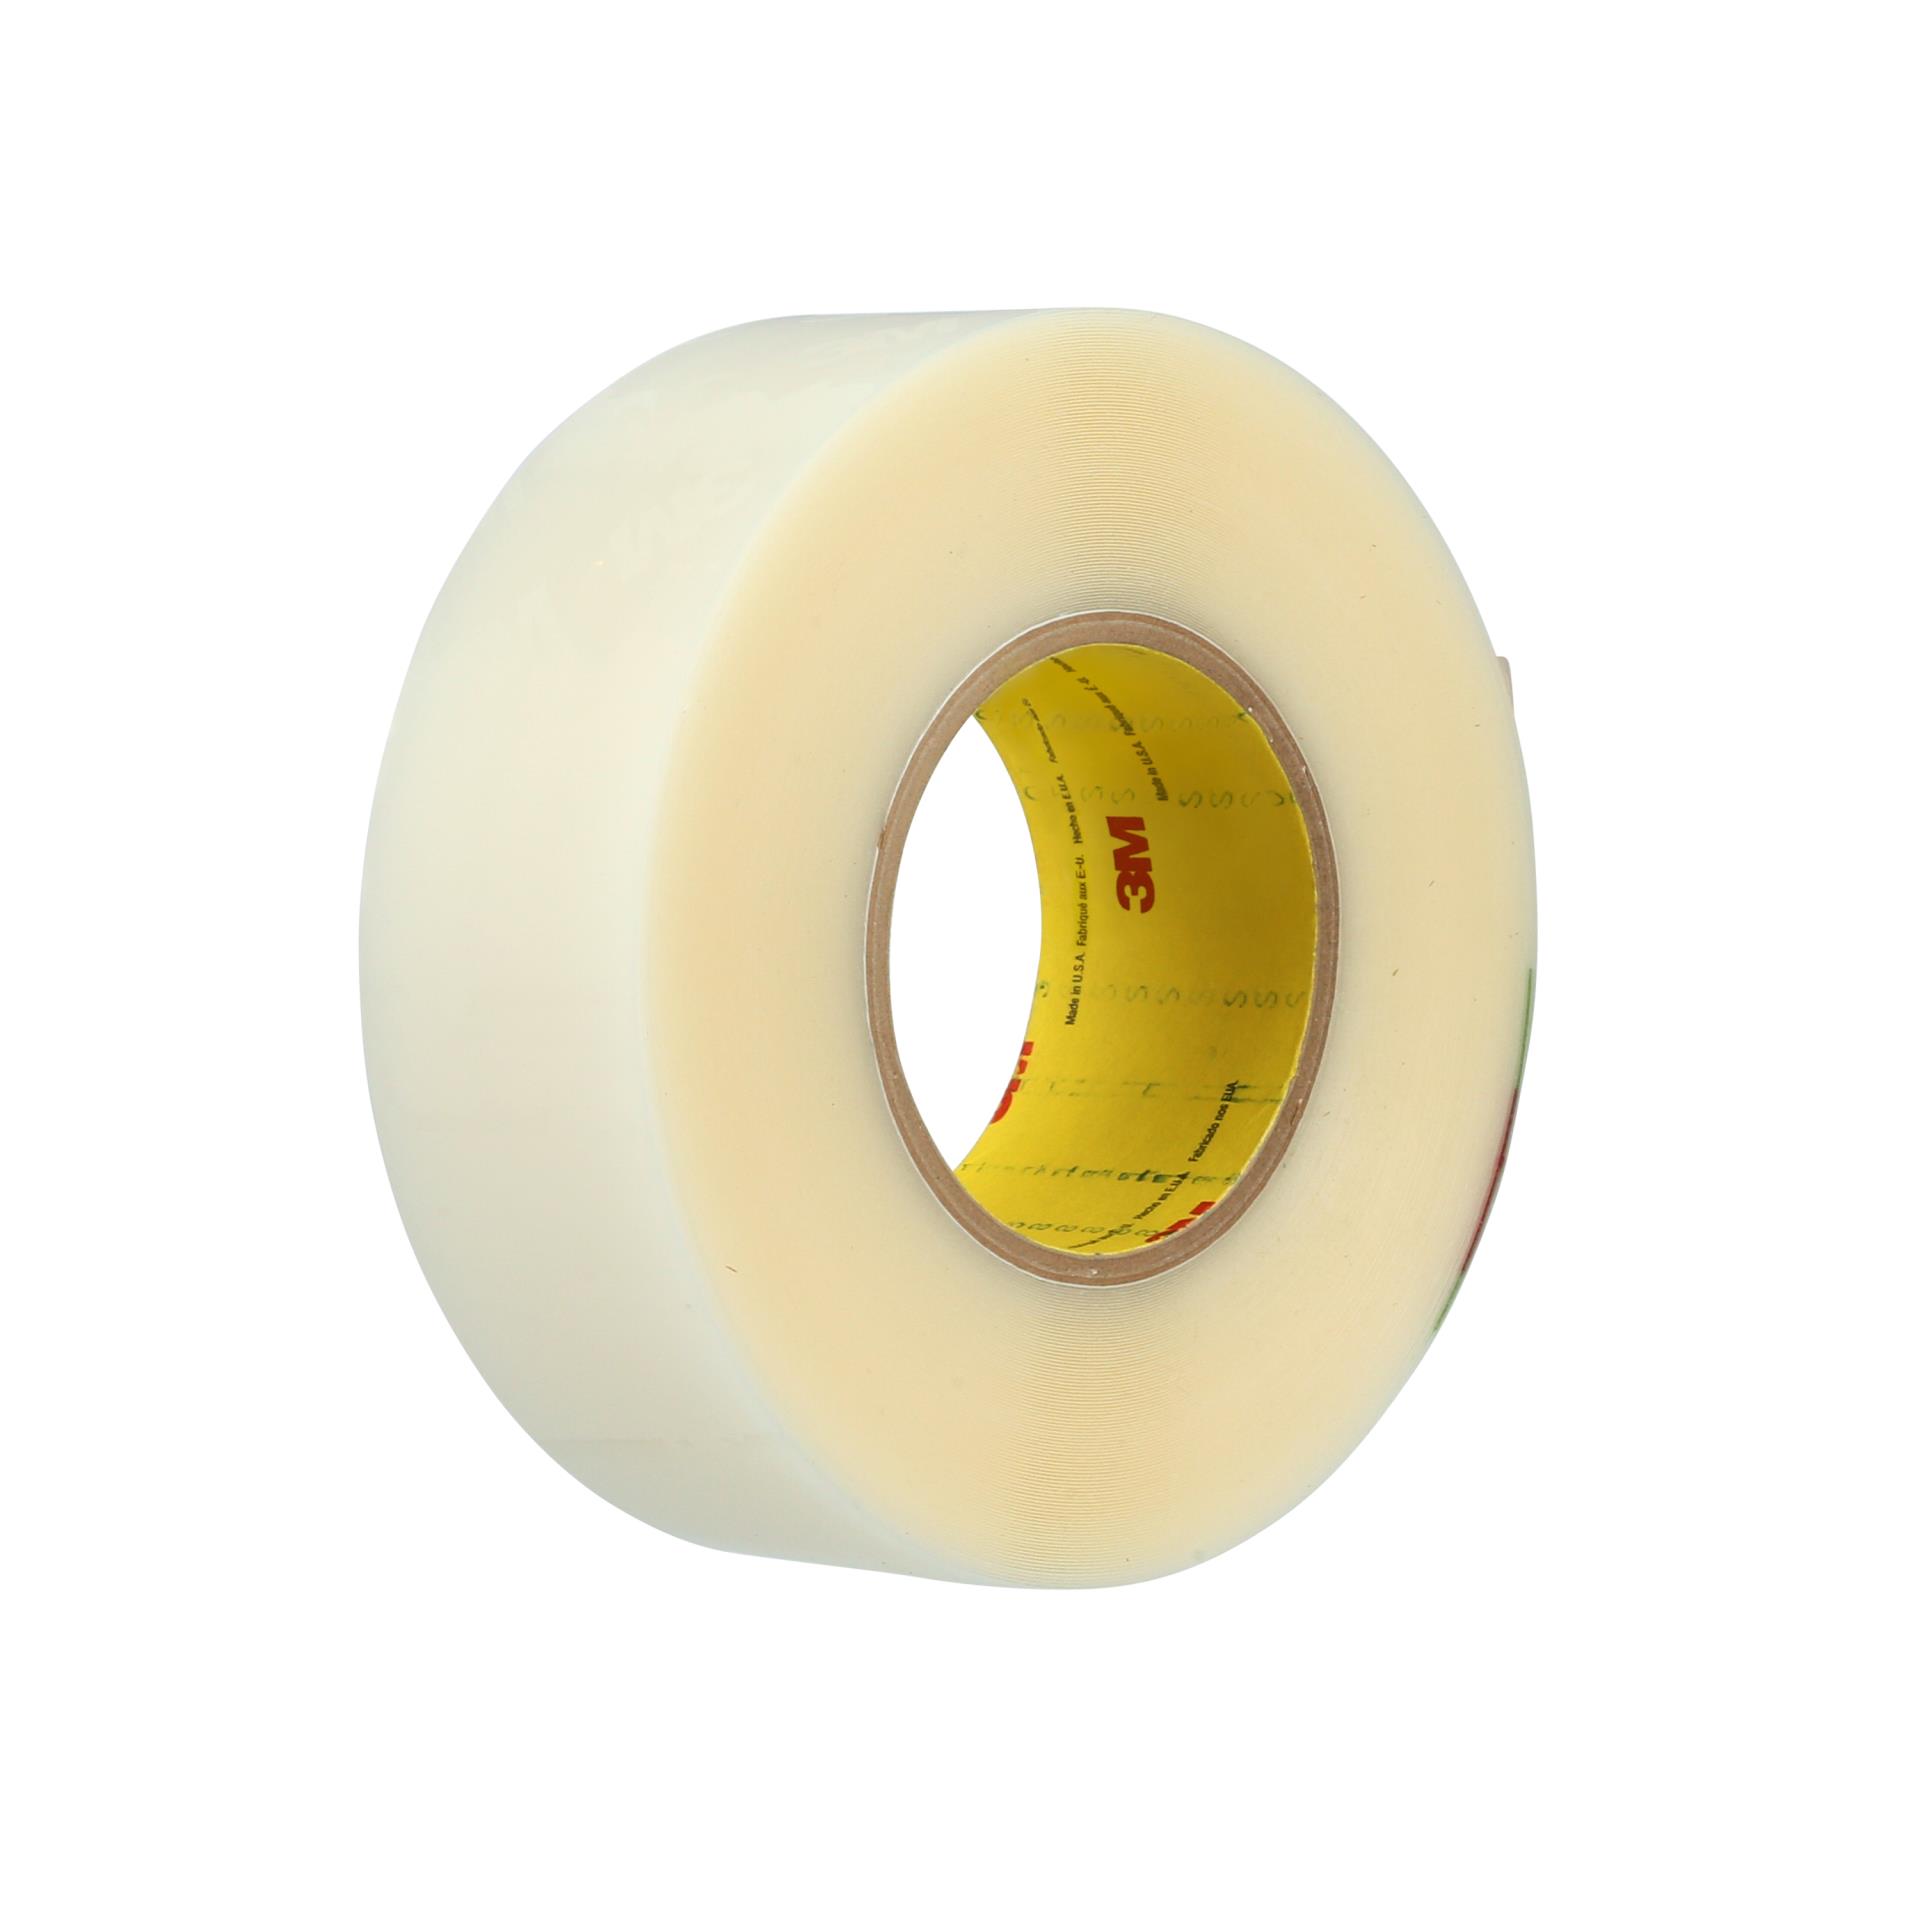 Each 1-1//2-In Lot of two 3M Indoor Carpet Tape x 42-Ft